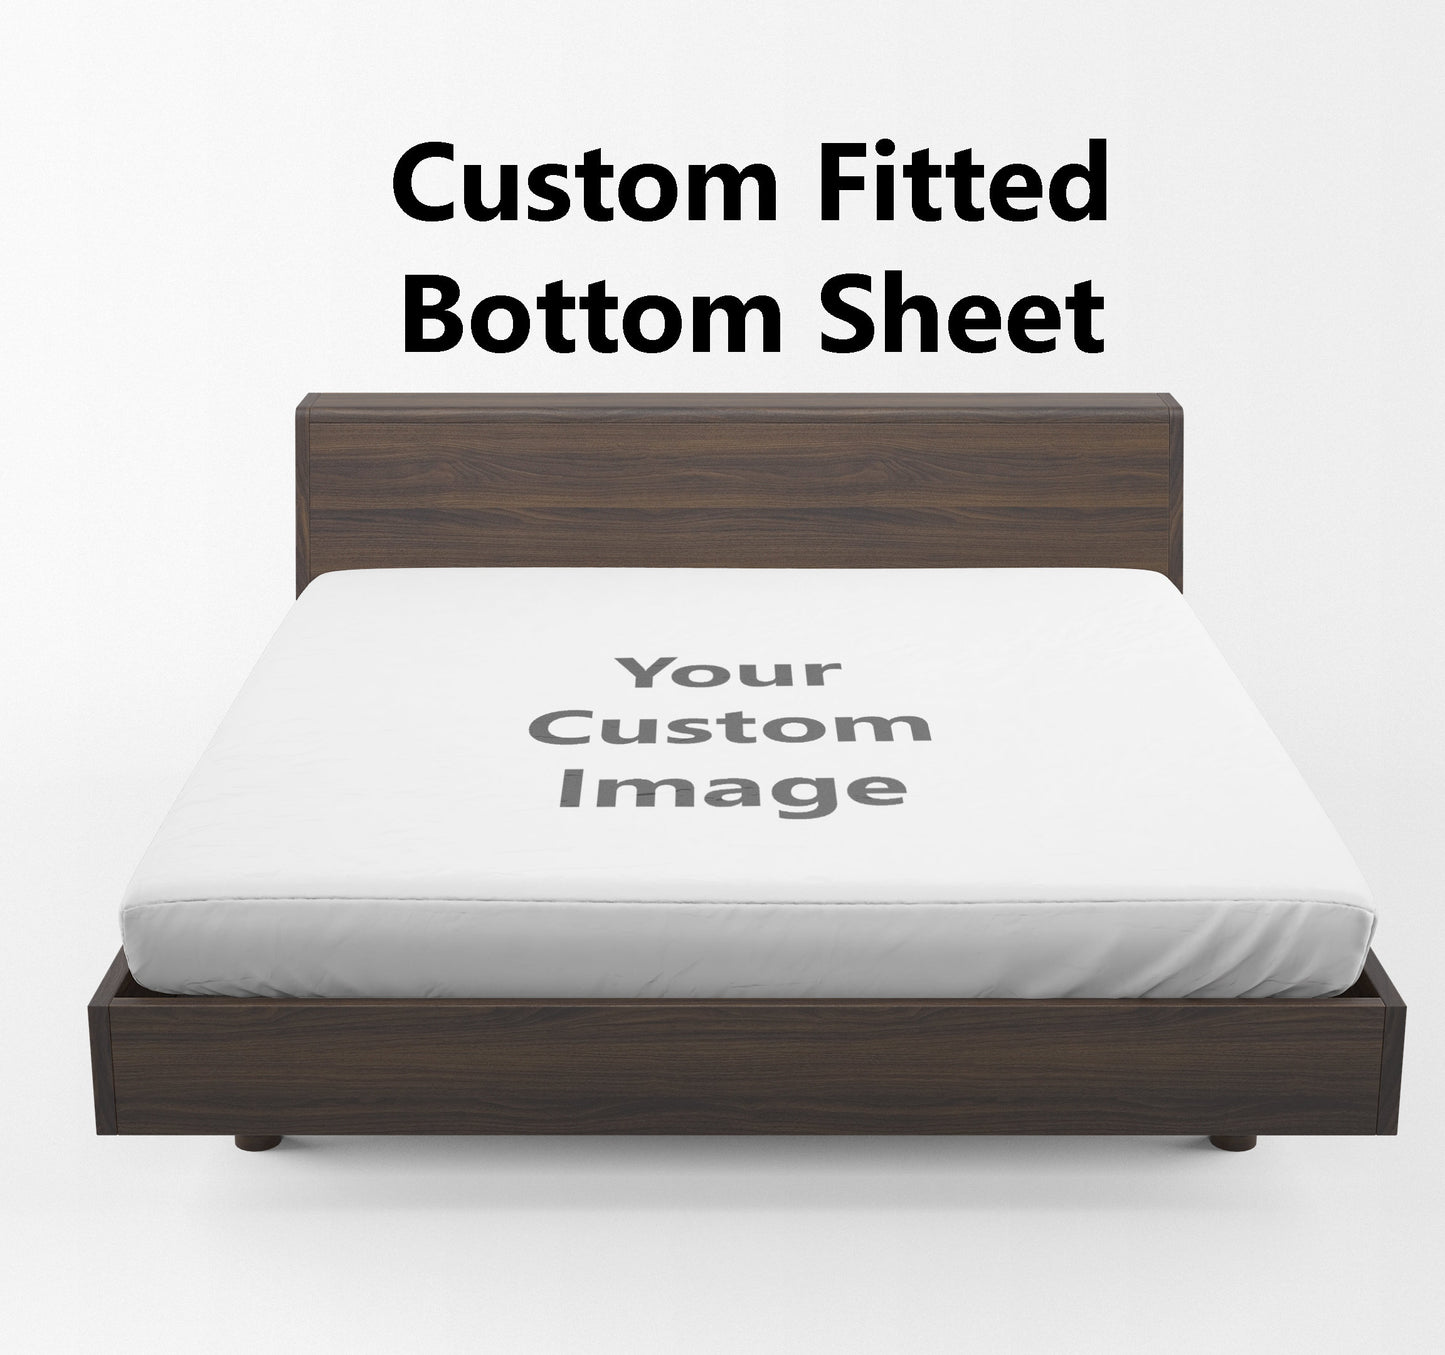 Custom Sheets customized bedding personalized fitted sheets personalised bed sheets photo sheets own image bedding custom gift unique